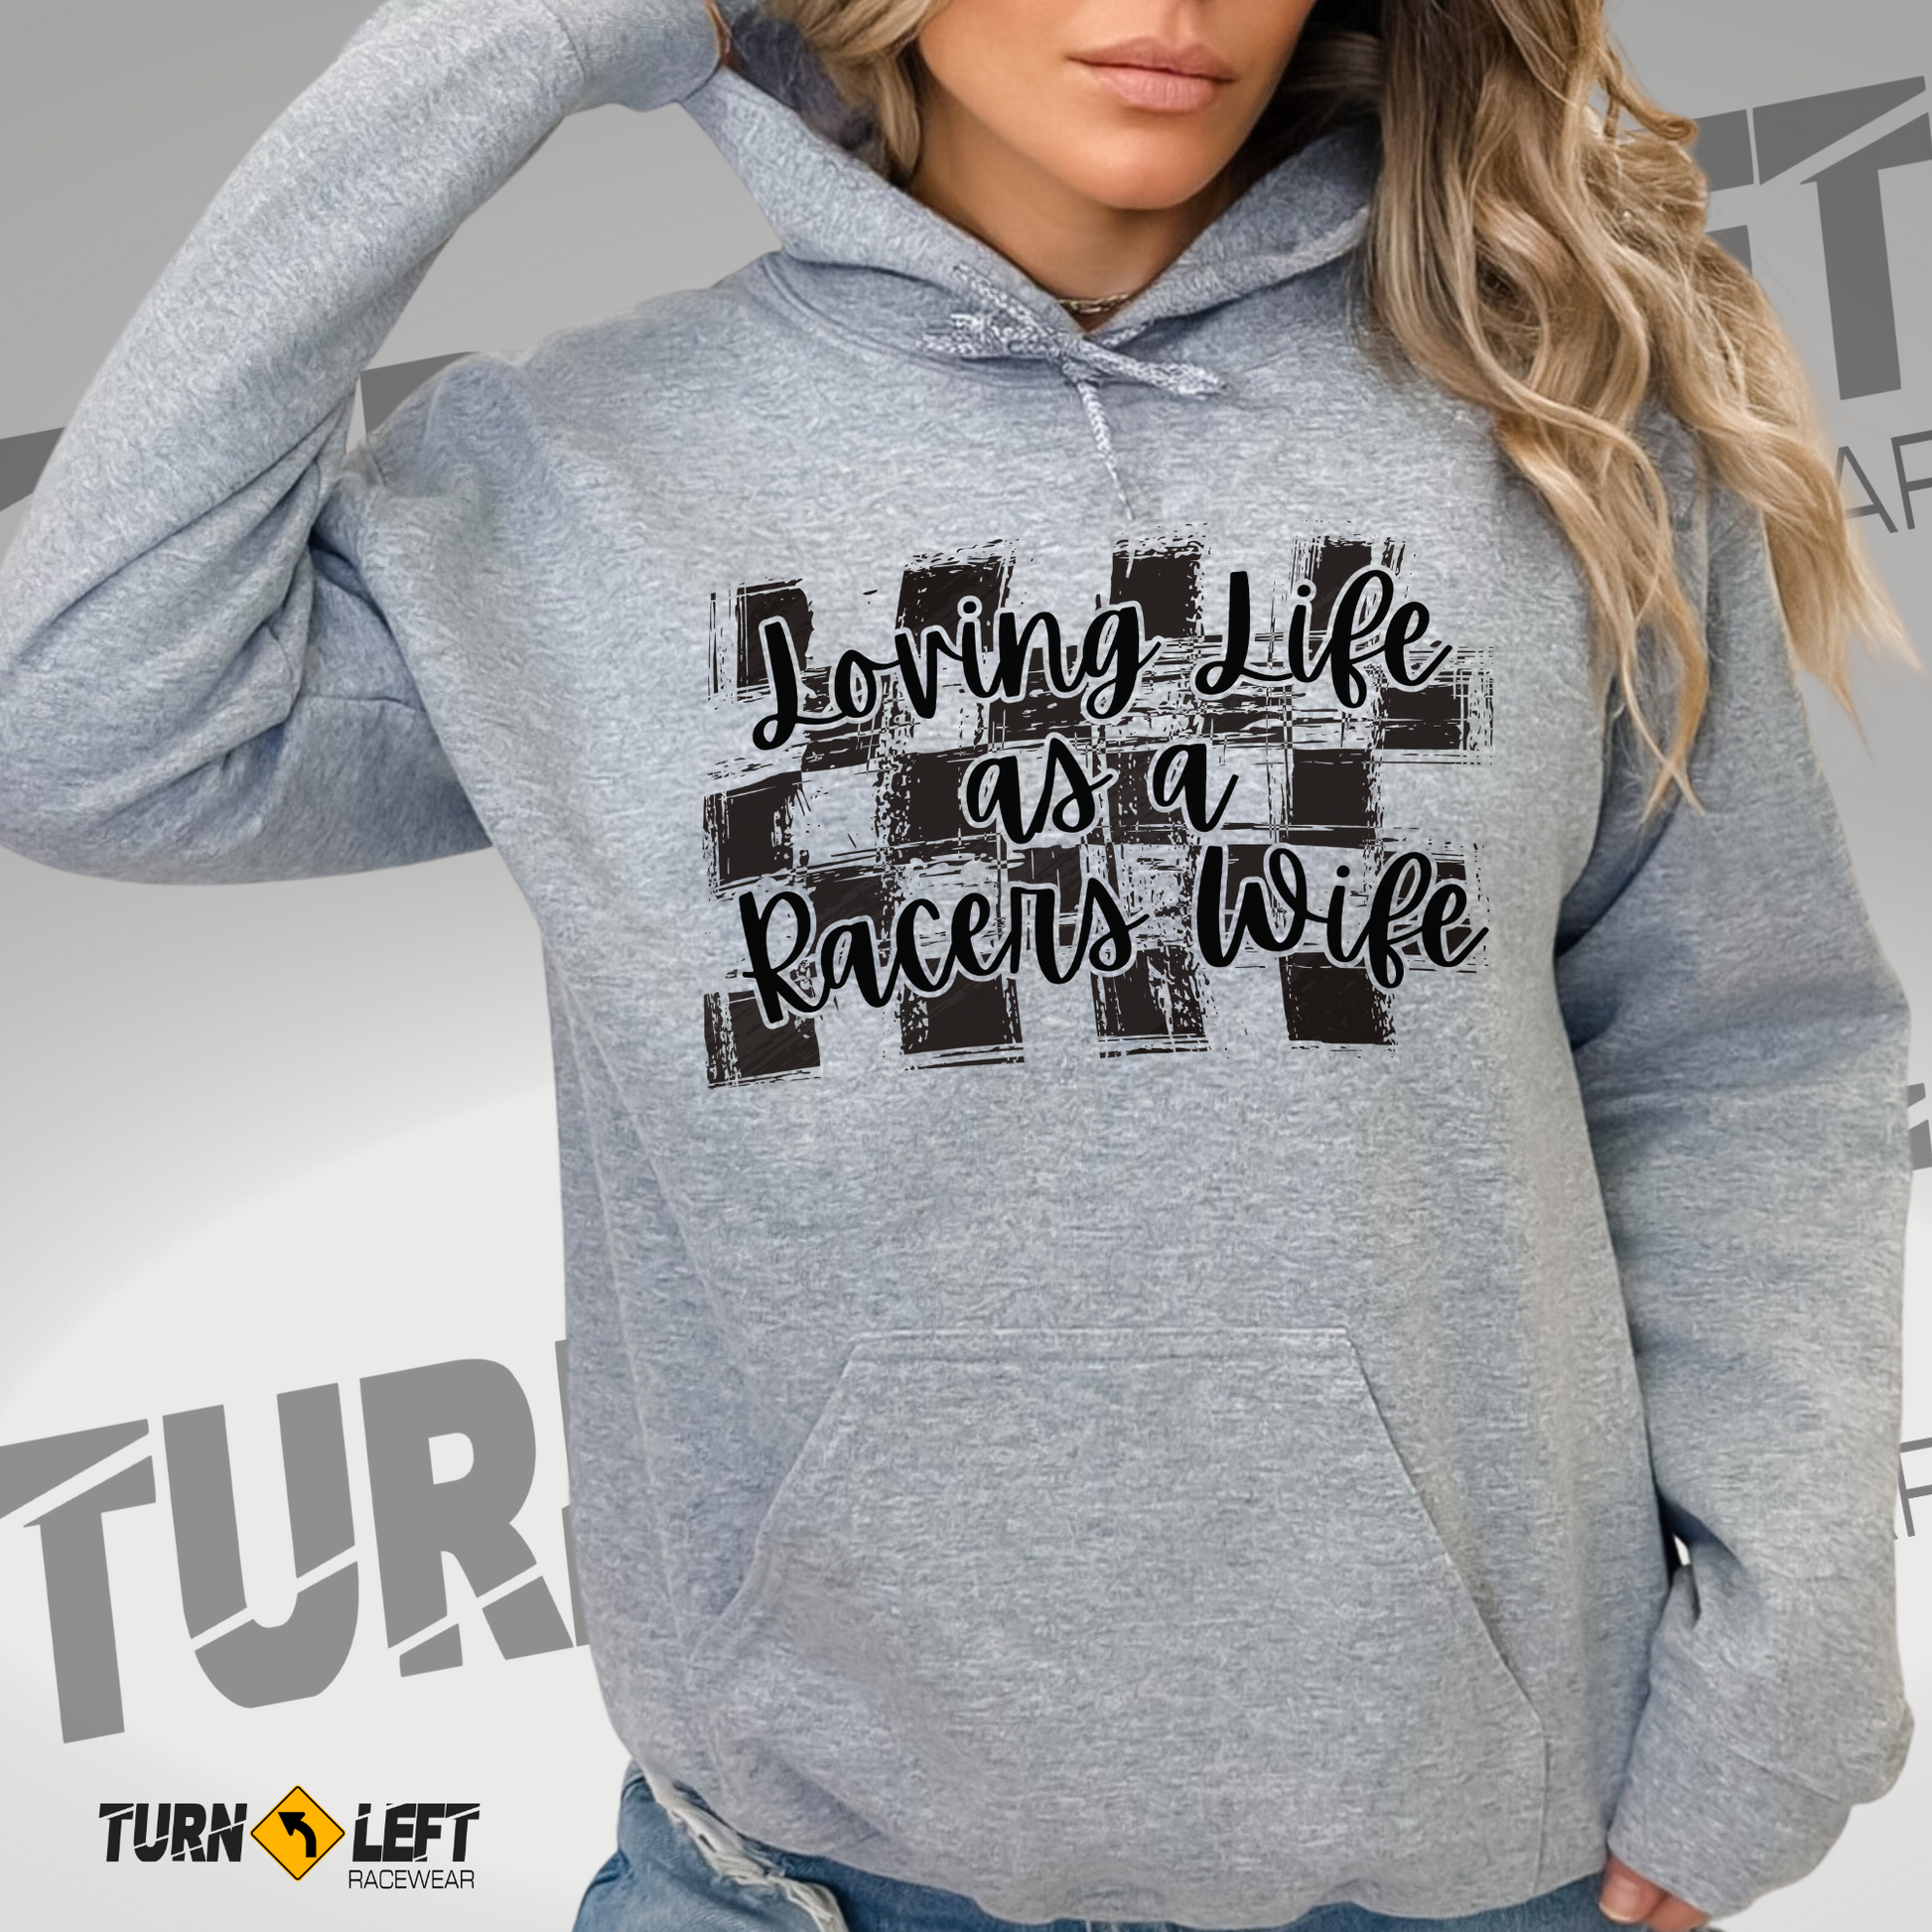 Race Wife Shirts, Racing Quote Sweatshirts. Womens Racing Gifts, Loving Life As A Racers Wife Sweatshirts. Dirt Track Racing Sweatshirts for Women. Race Wife Gifts 